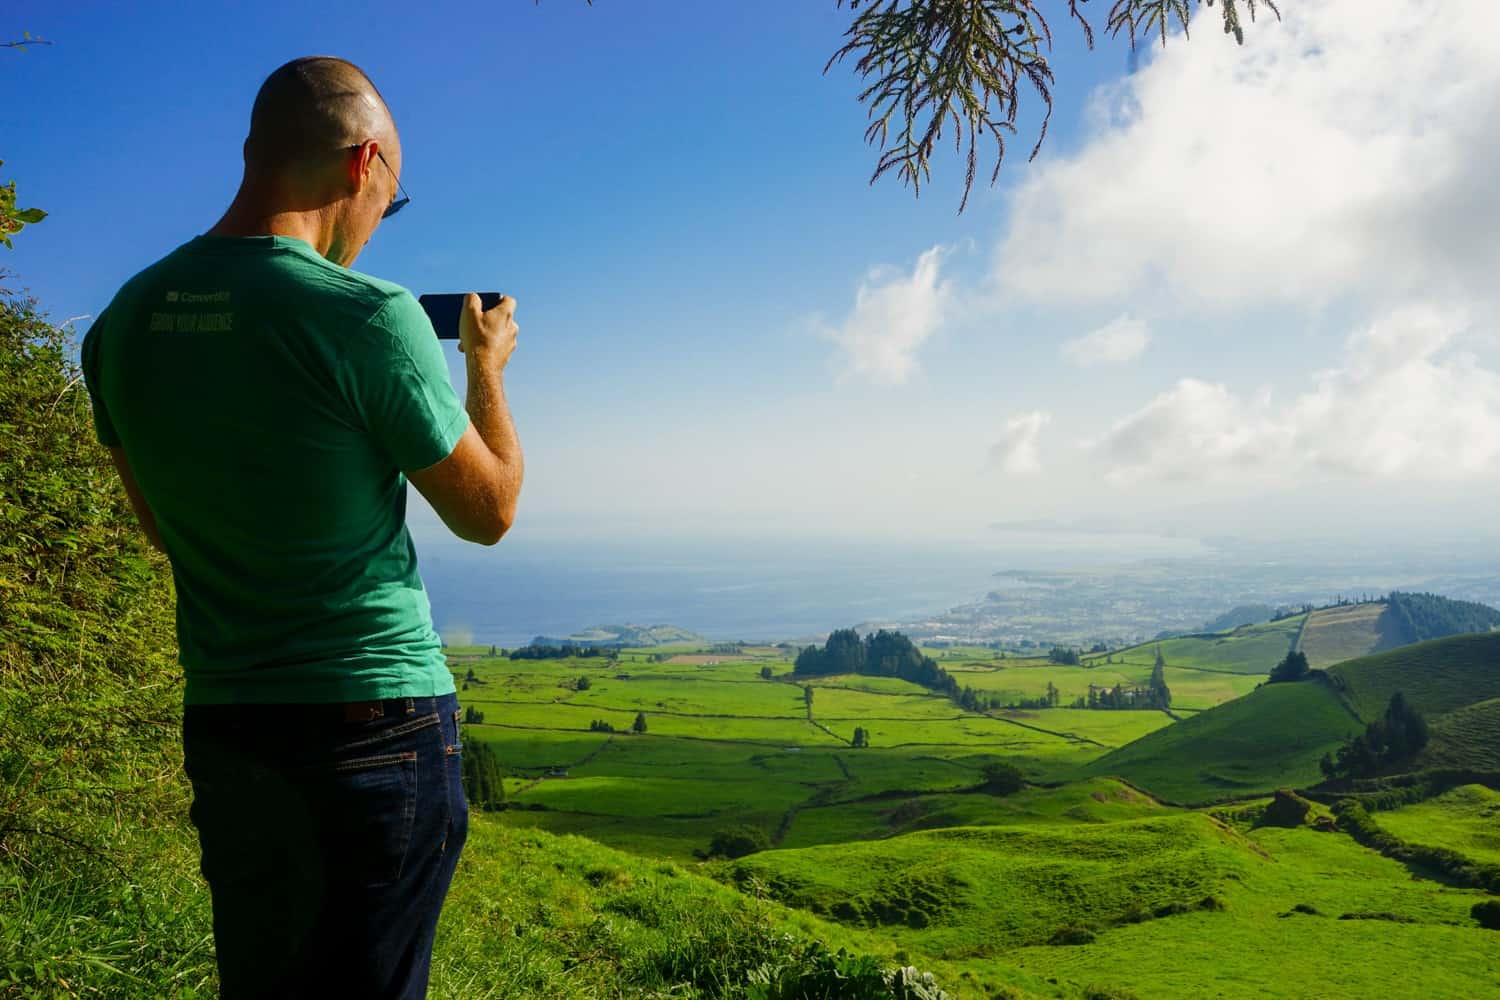 Taking a photo on Sao Miguel in the Azores